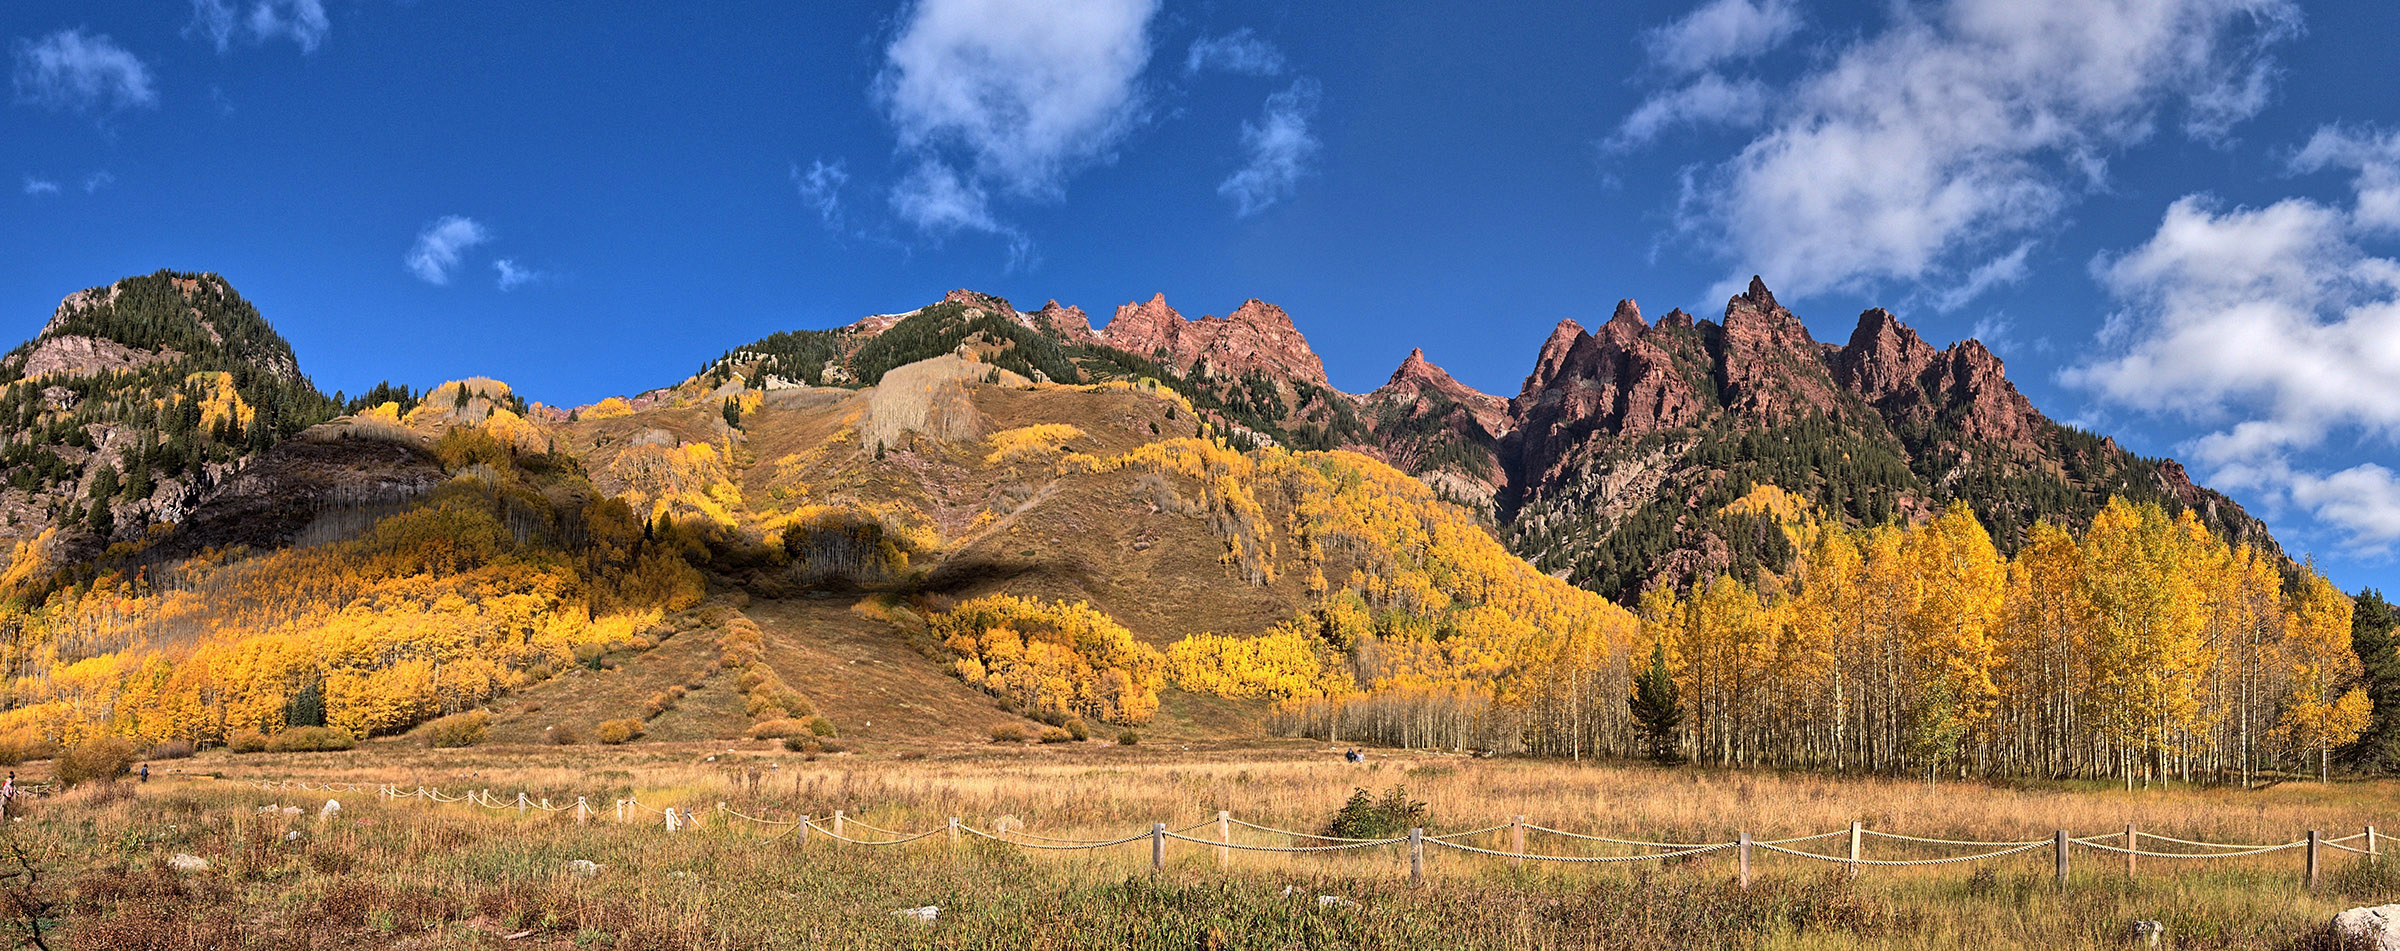 Peaks of Maroon Formation (red shale) and aspen trees along the edge of the Maroon Amphitheater Area.